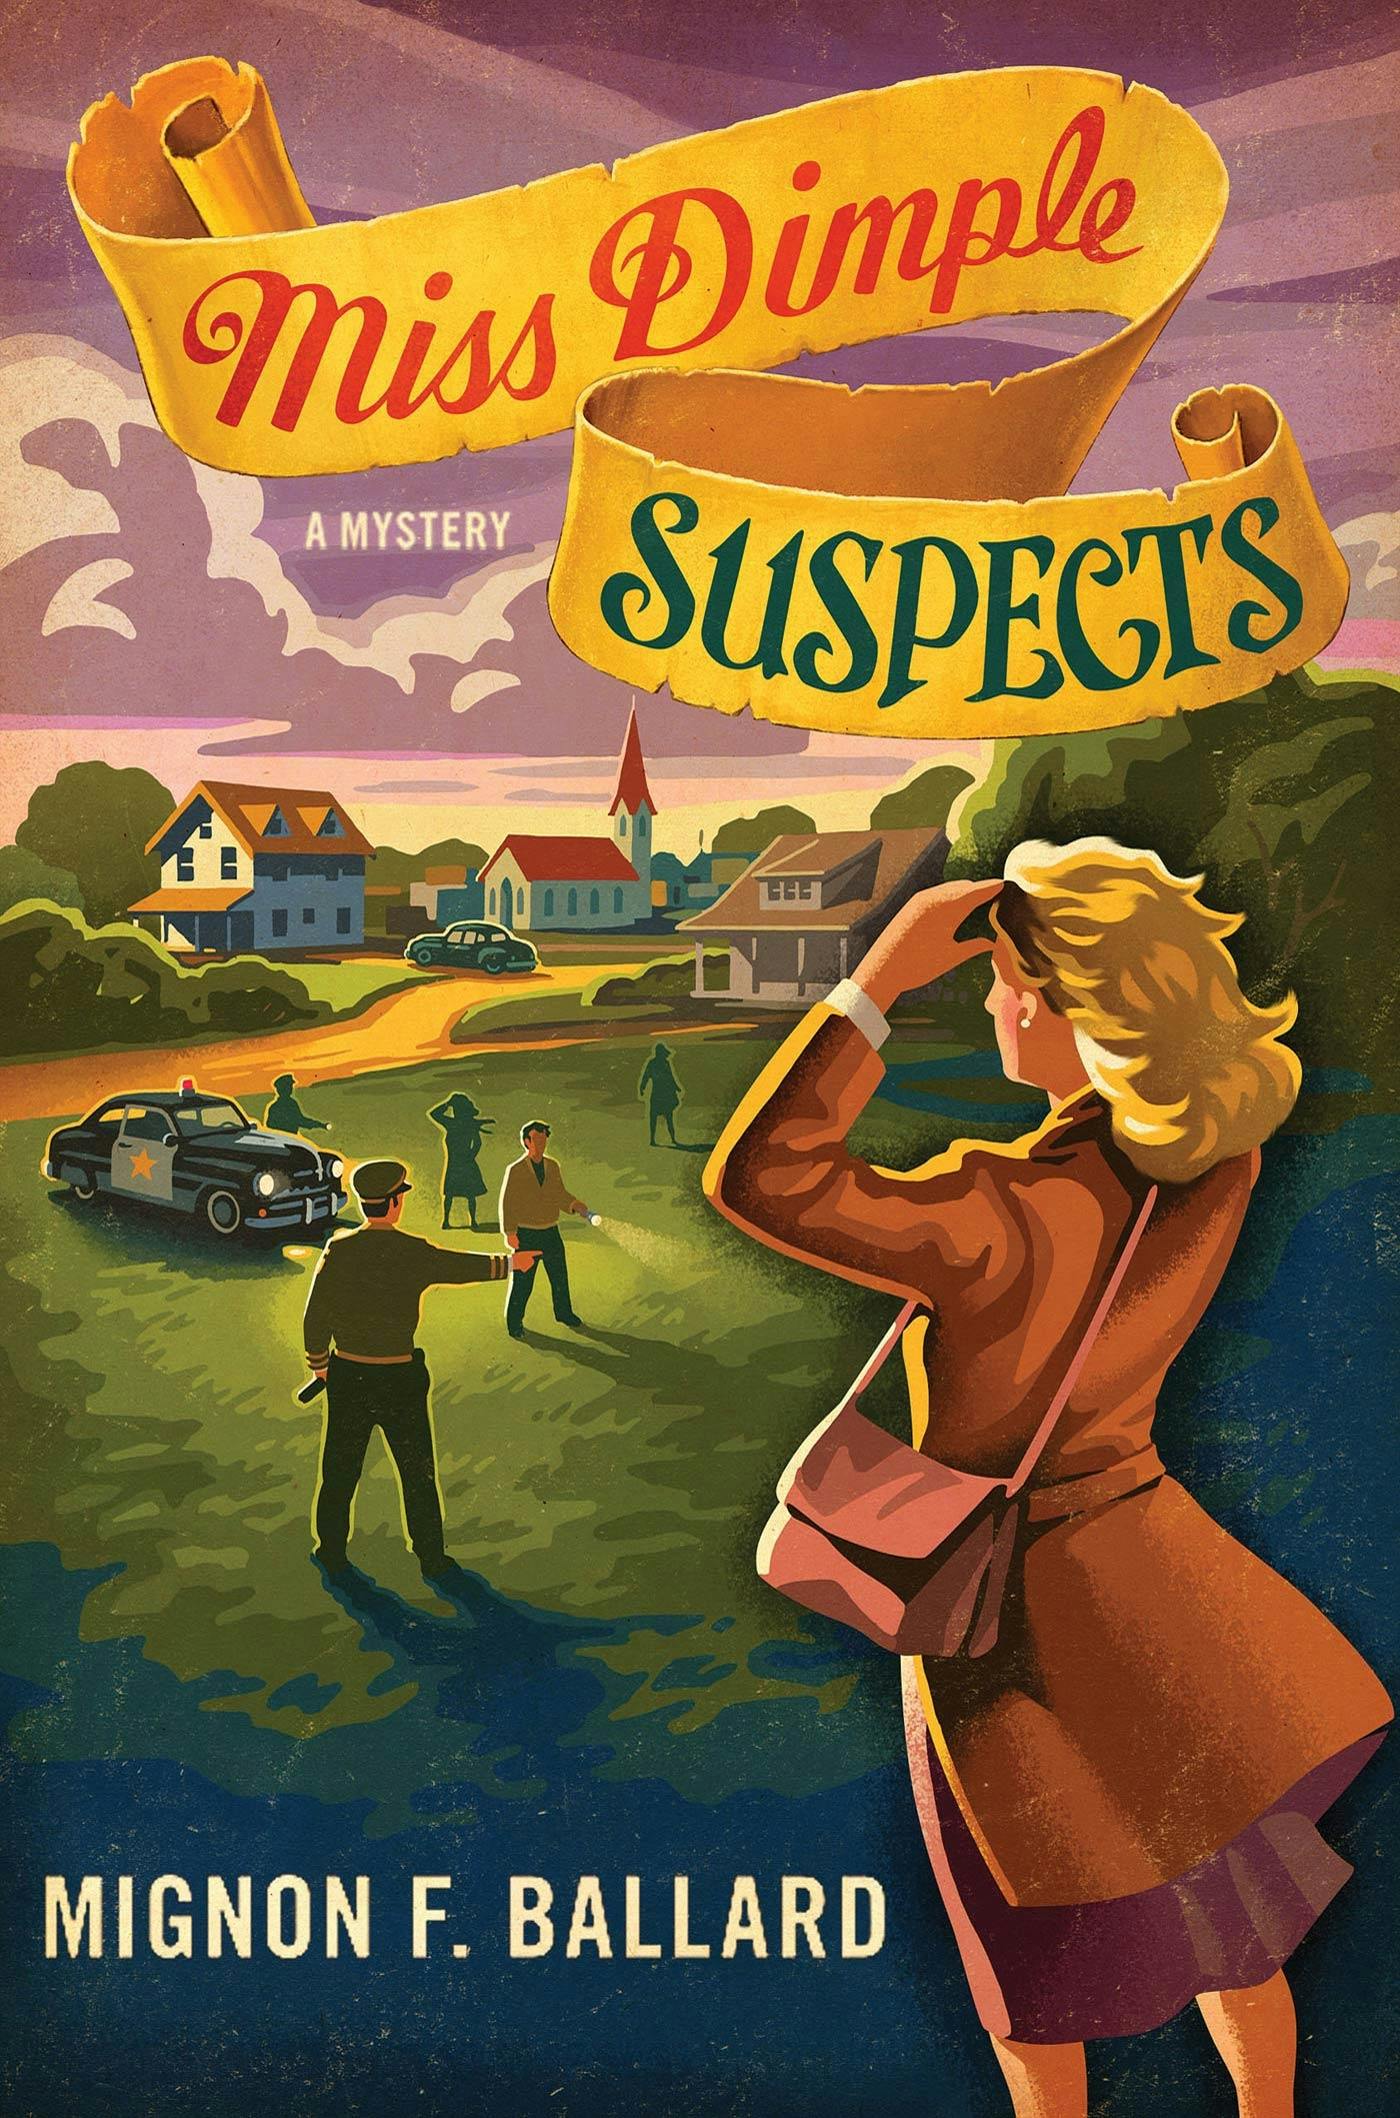 Image of Miss Dimple Suspects